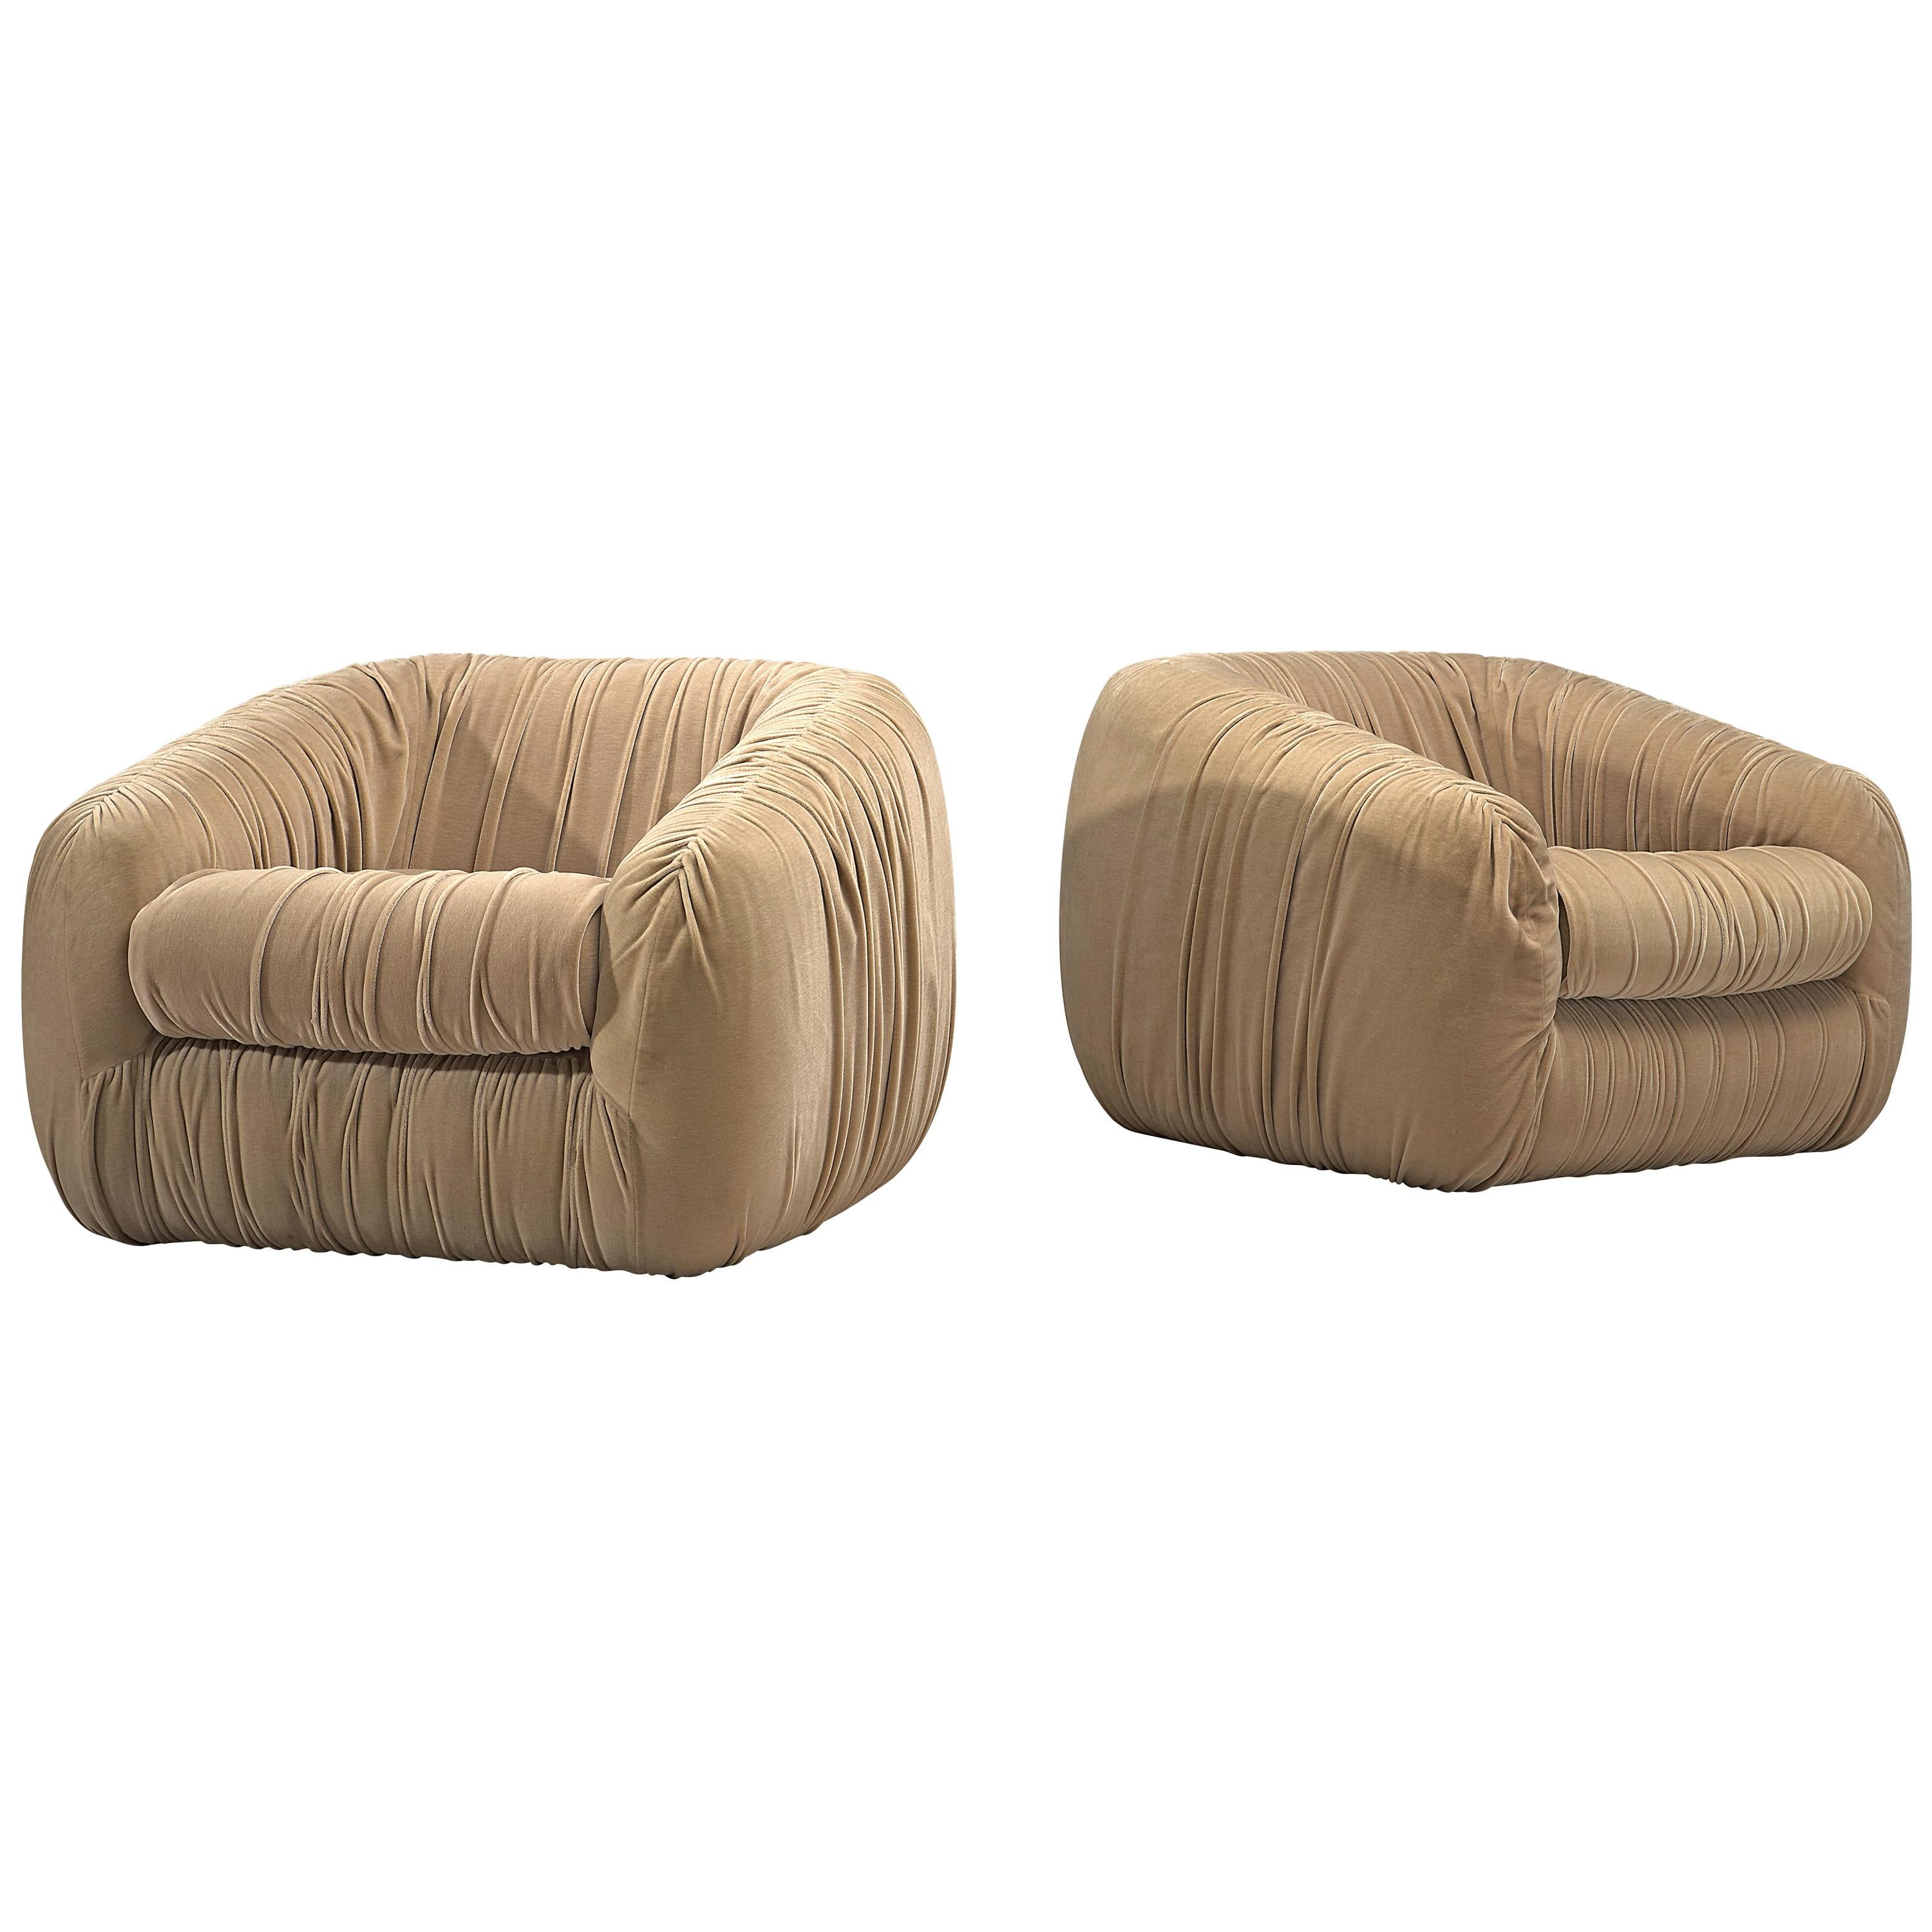 Pair of Bulky Airbone Lounge Chairs in Beige Velvet Upholstery 